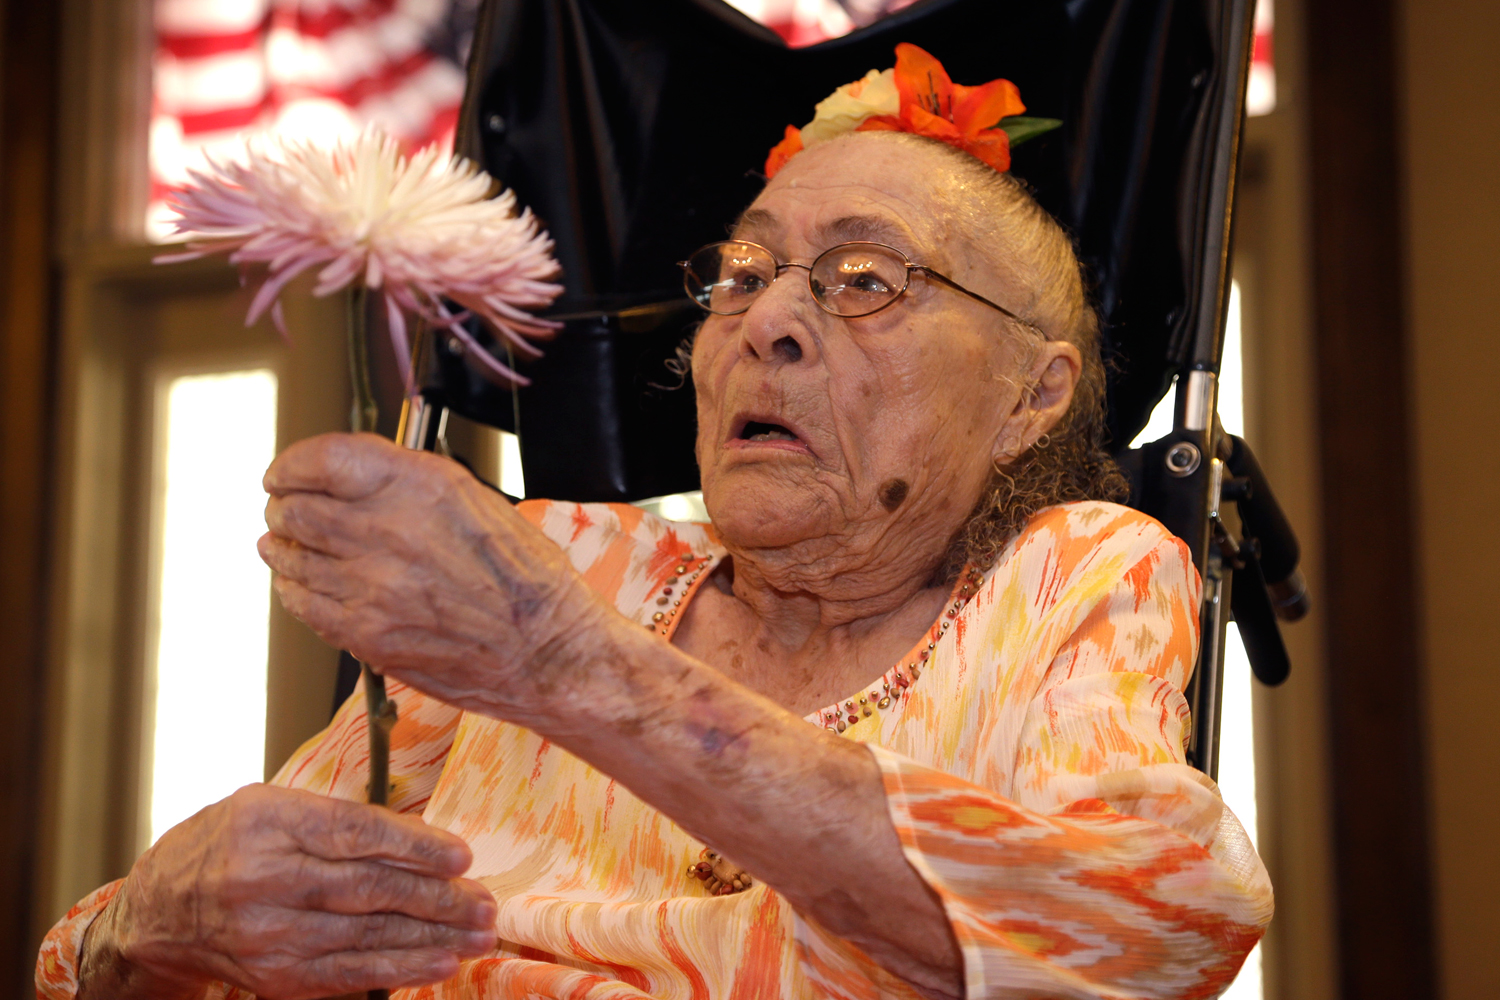 Gertrude Weaver holds a flower given to her a day before her 116th birthday at Silver Oaks Health and Rehabilitation in Camden, Ark on July 3, 2014. (Danny Johnston / AP)